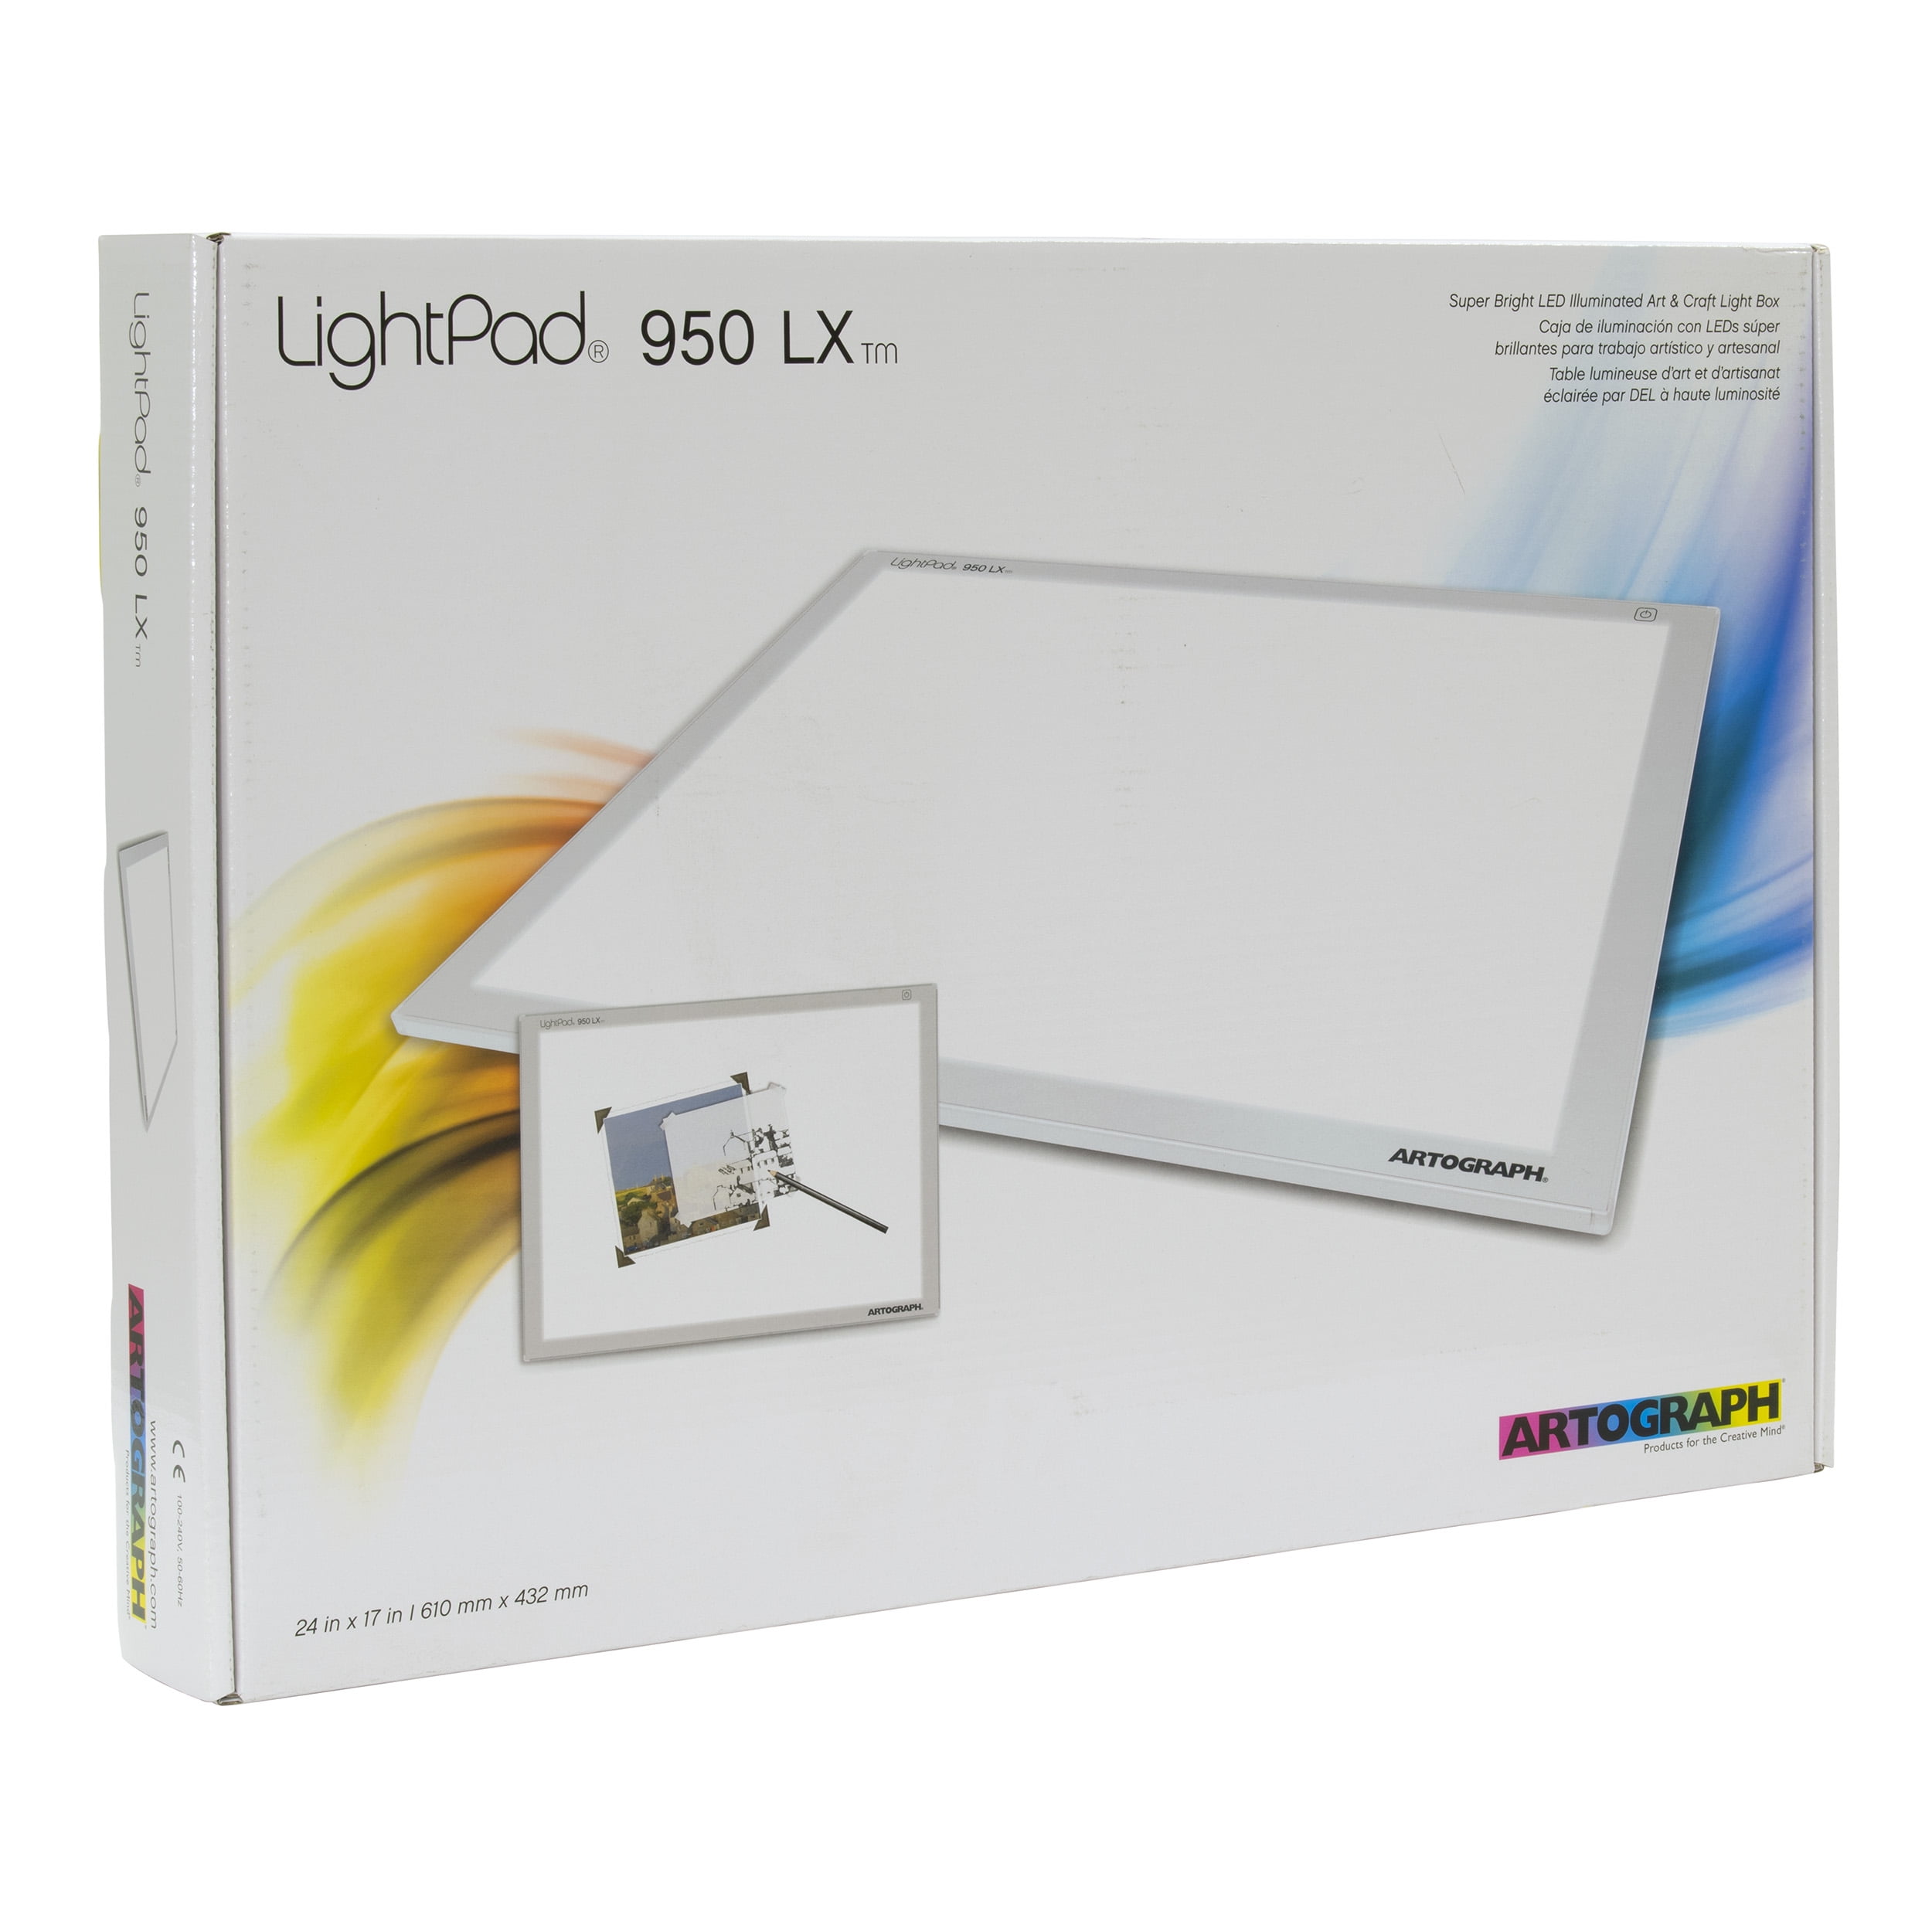 Unboxed Review - Huion A2 LED Light Pad - Art For Kids Hub 